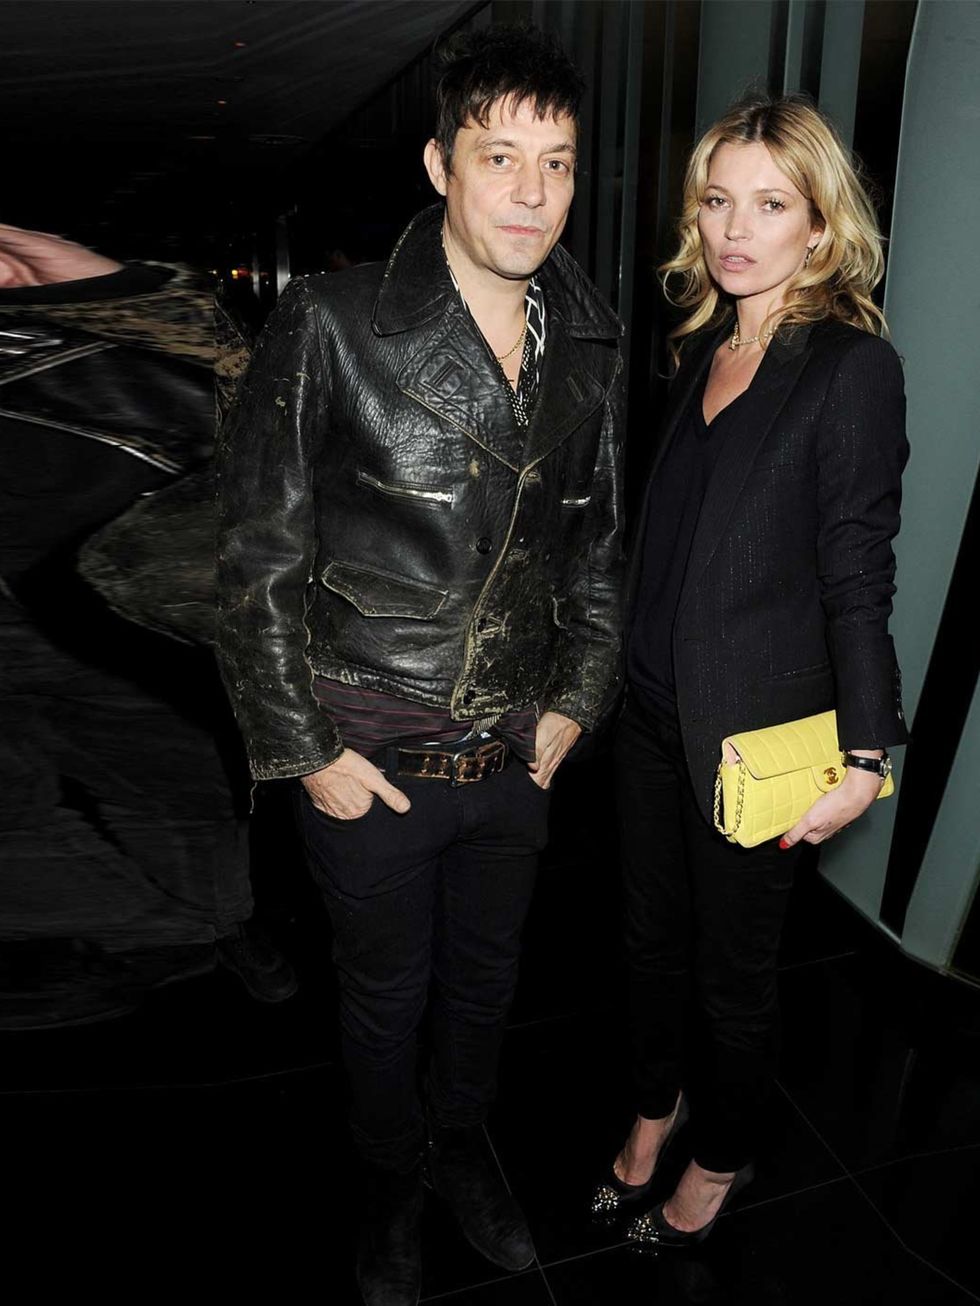 <p><a href="http://www.elleuk.com/star-style/celebrity-style-files/kate-moss-wedding">Jamie Hince</a> &amp; <a href="http://www.elleuk.com/star-style/celebrity-style-files/kate-moss">Kate Moss</a> at the NME Awards 2012 after party at the W Hotel in Londo